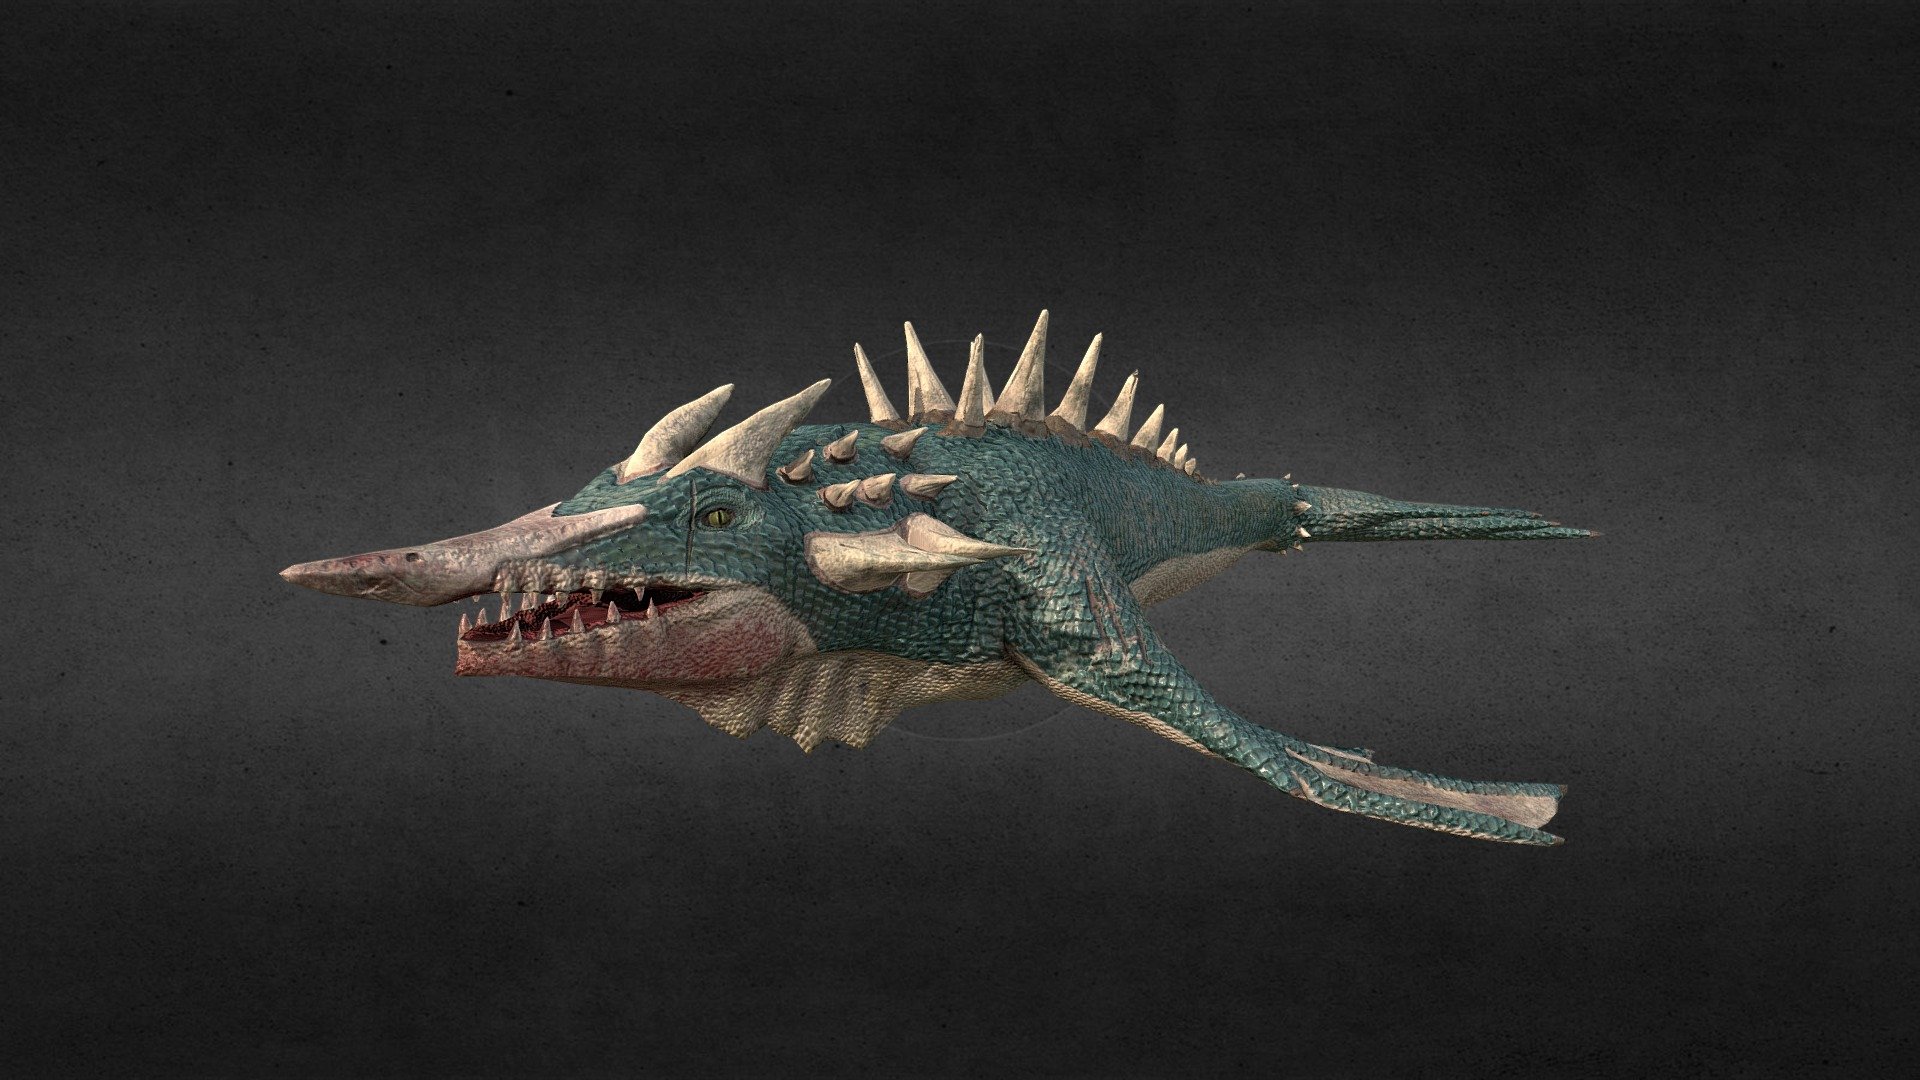 learn how to make a monster
hope you like it - crocodile monster - 3D model by miewpupu (@miewpupu3d) 3d model